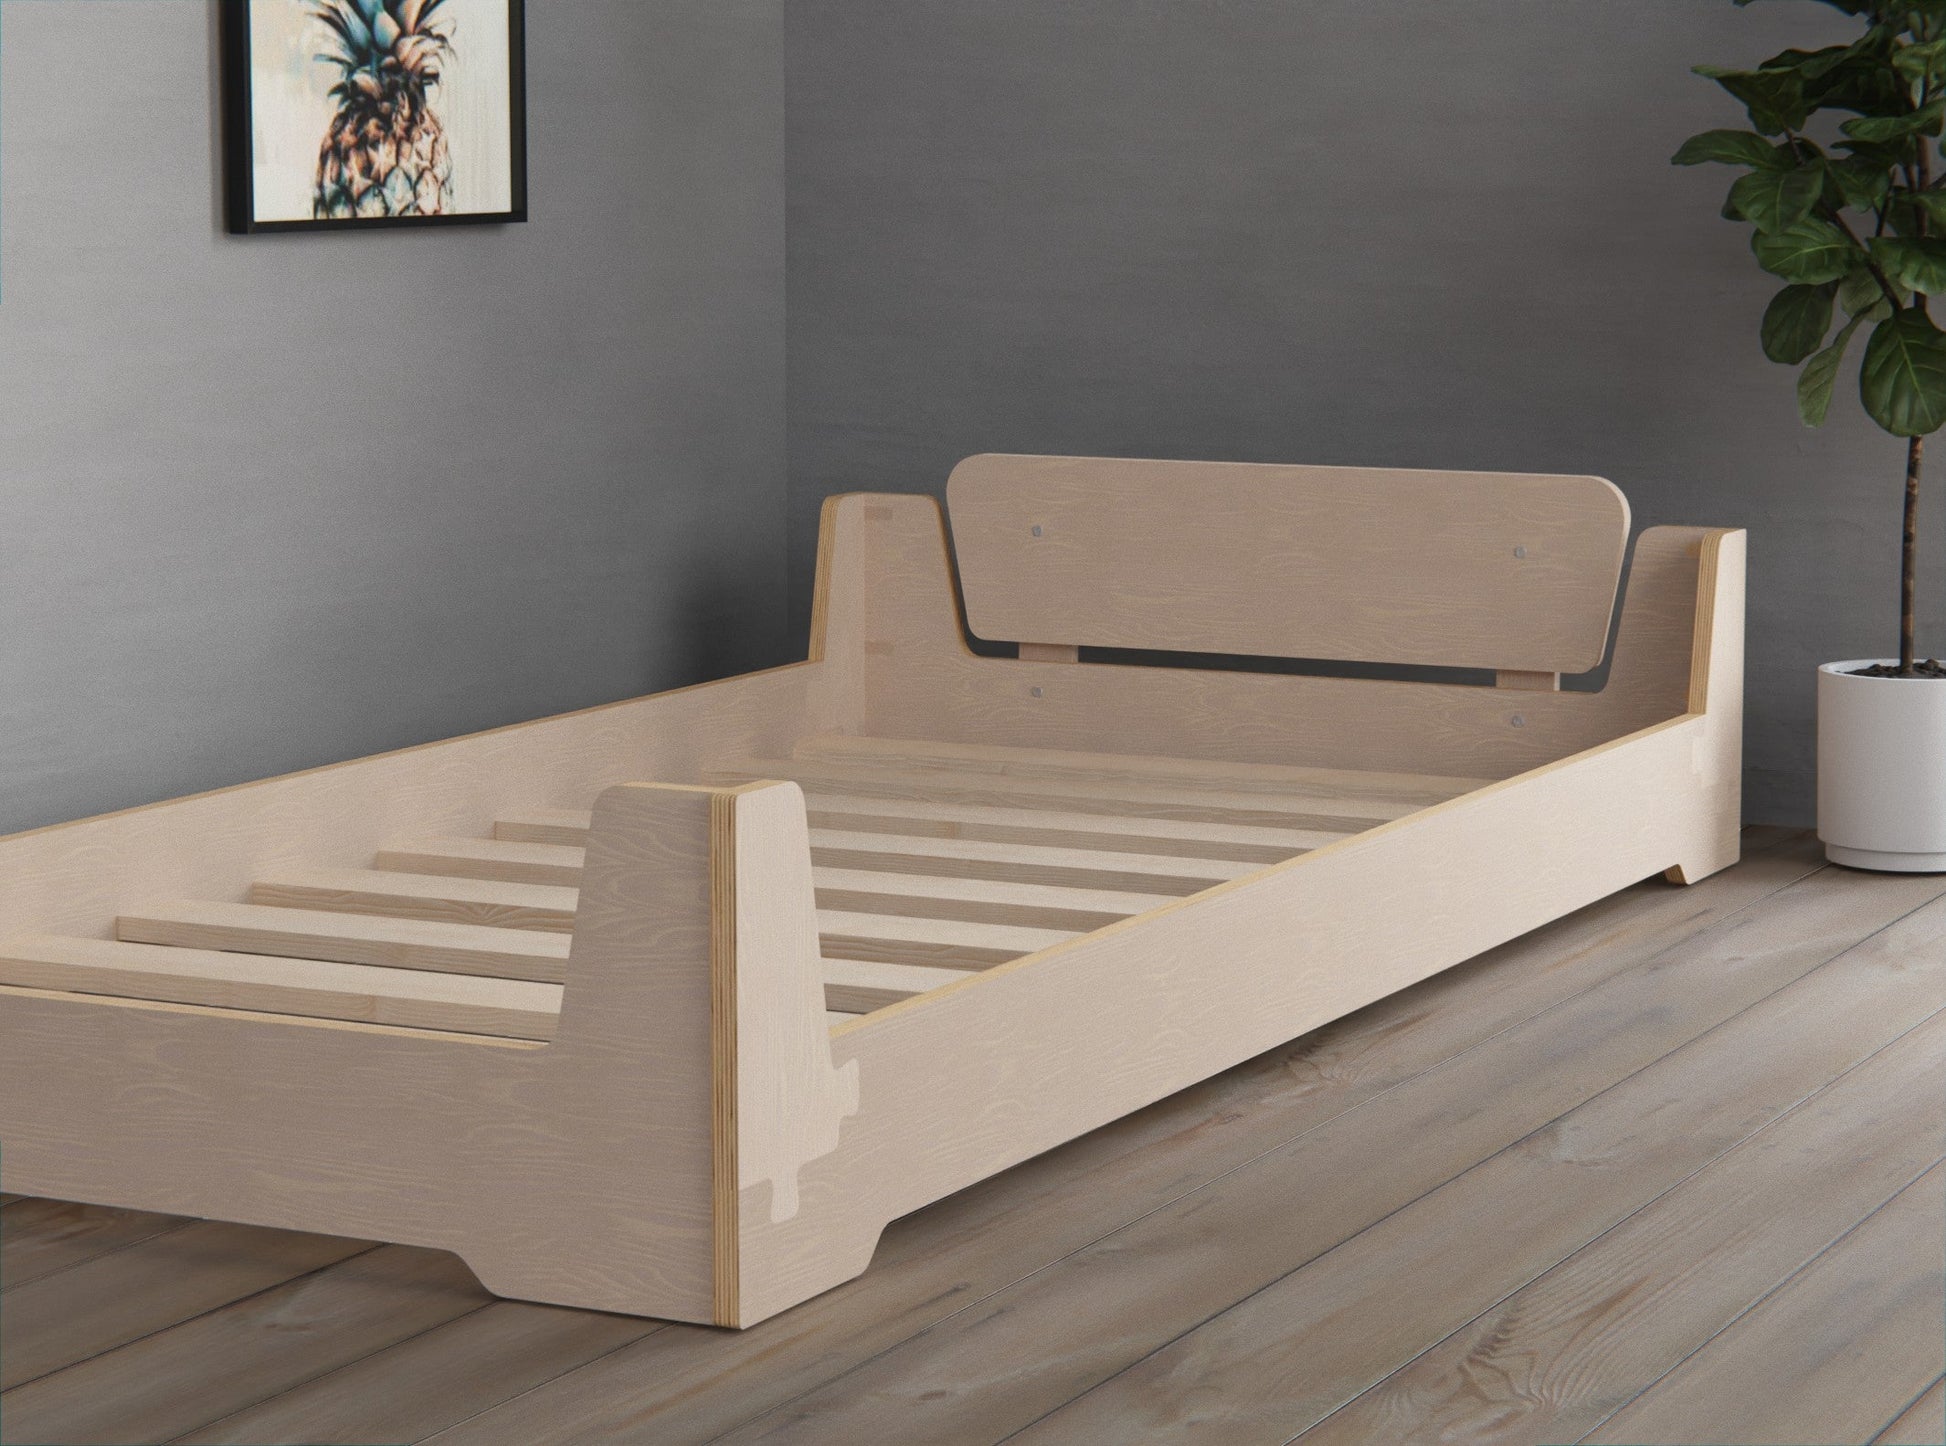 Wooden flippable bed with a headboard